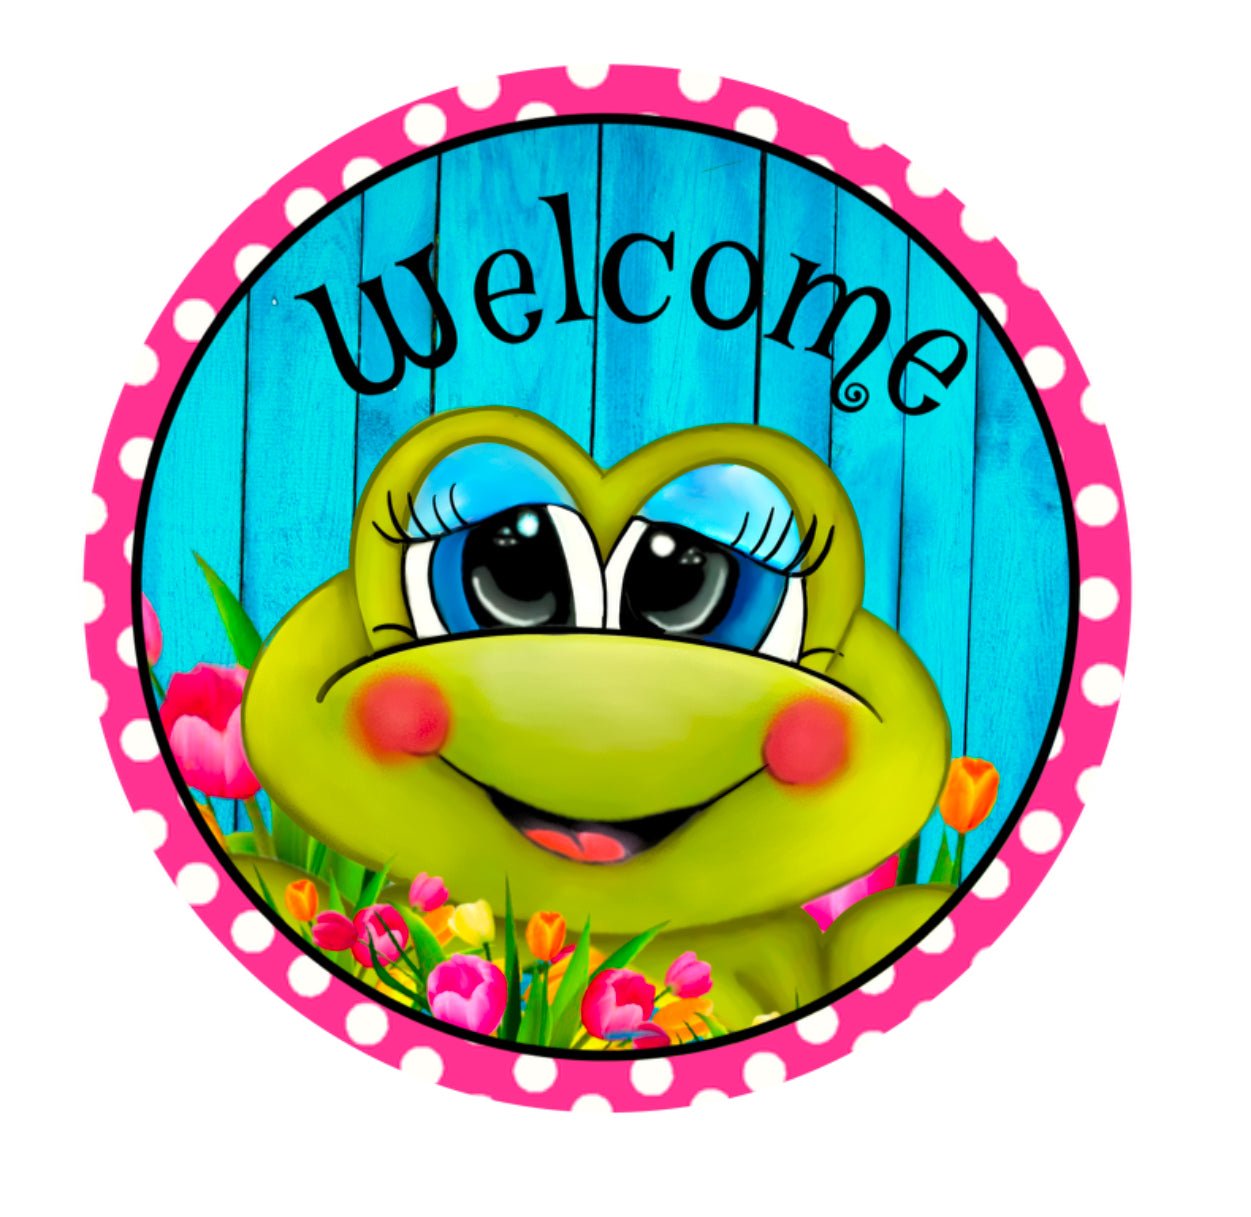 Floral Frog welcome, metal round sign 8” - Greenery Marketsigns for wreathsfrog8”SMALL